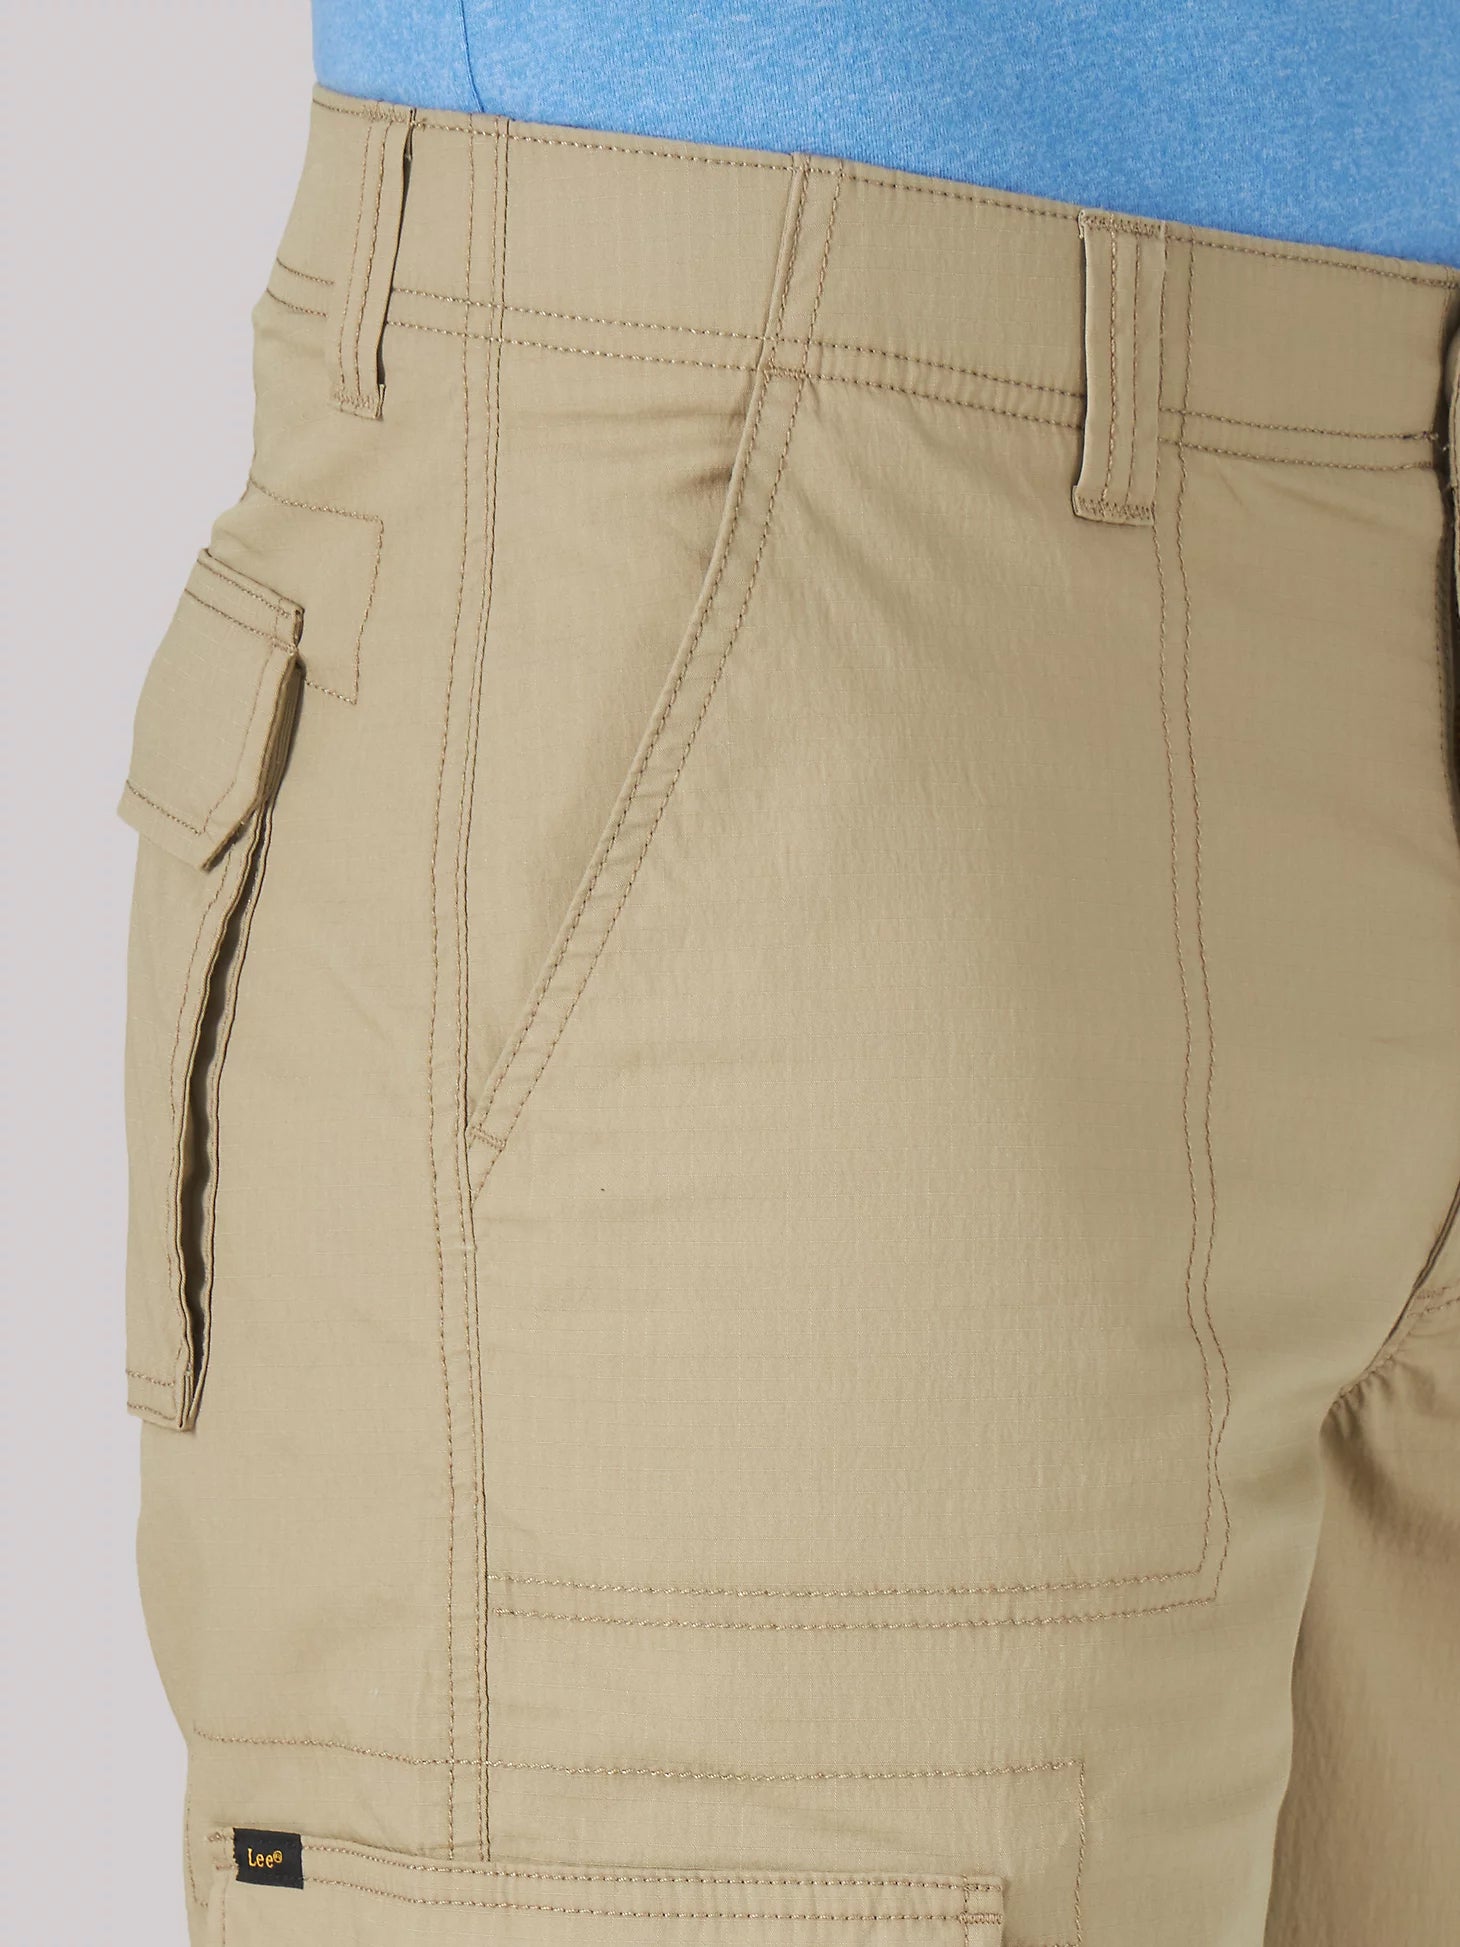 Lee 2314314 Extreme Motion Cameron Relaxed Cargo Shorts in Oscar Khaki Front Pocket Detail